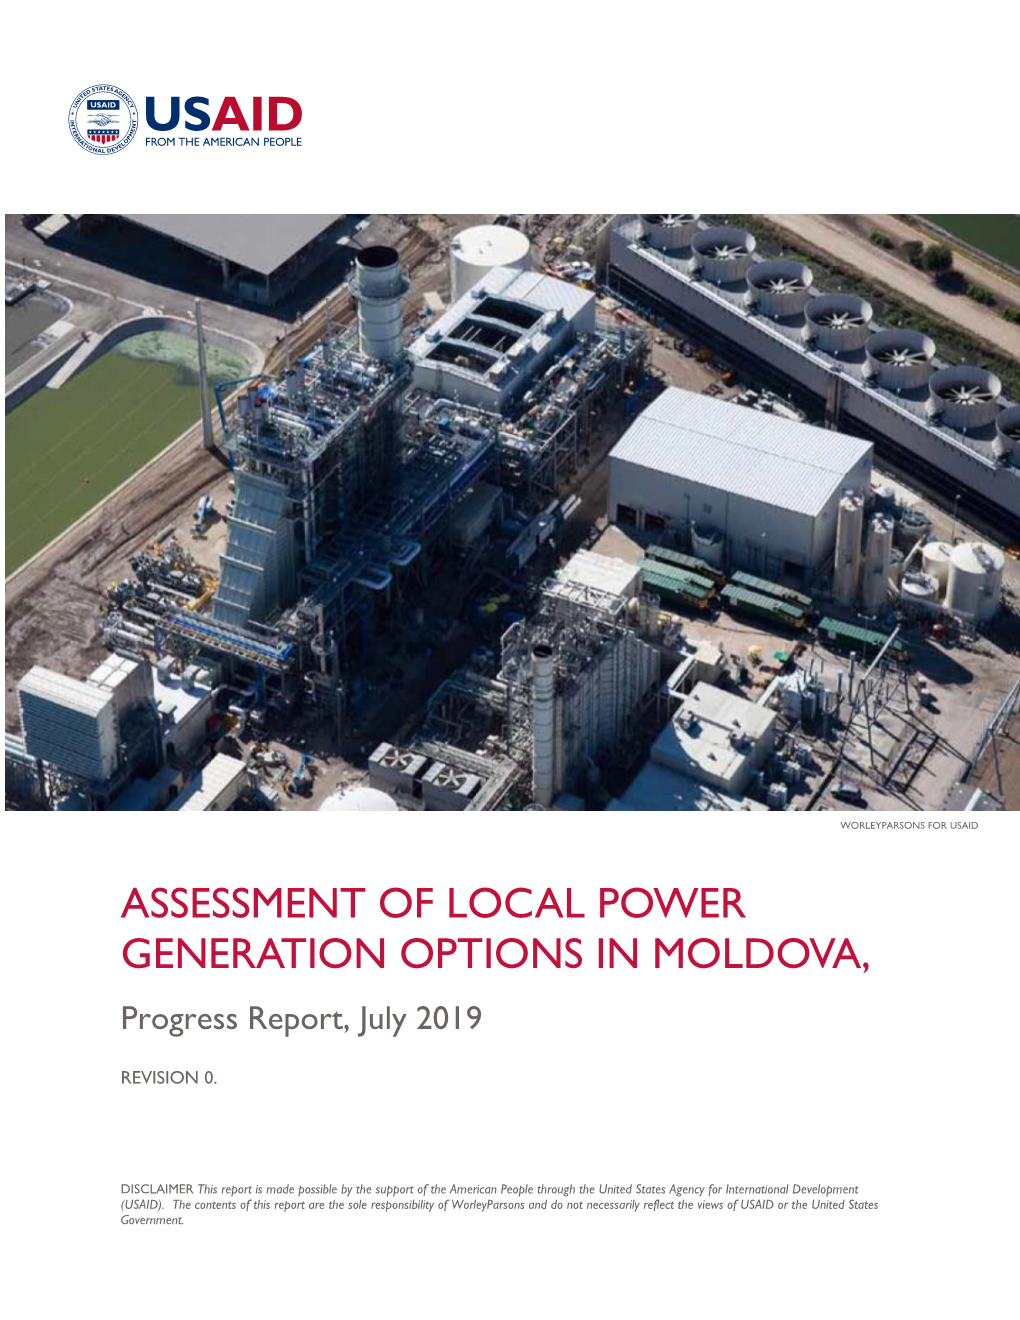 ASSESSMENT of LOCAL POWER GENERATION OPTIONS in MOLDOVA, Progress Report, July 2019